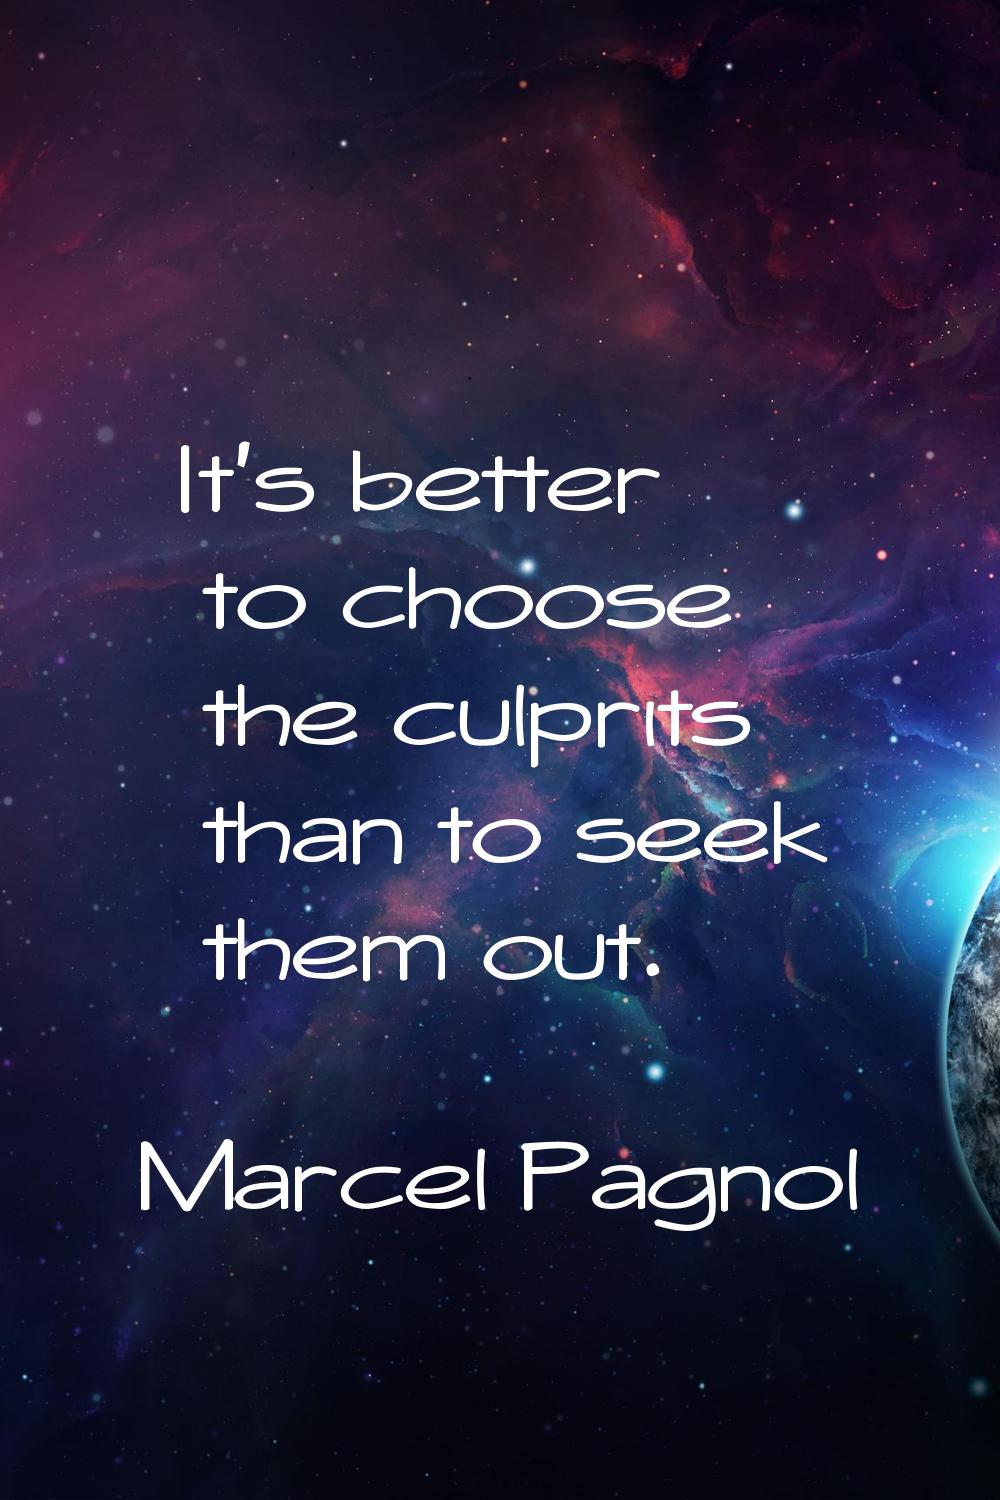 It's better to choose the culprits than to seek them out.